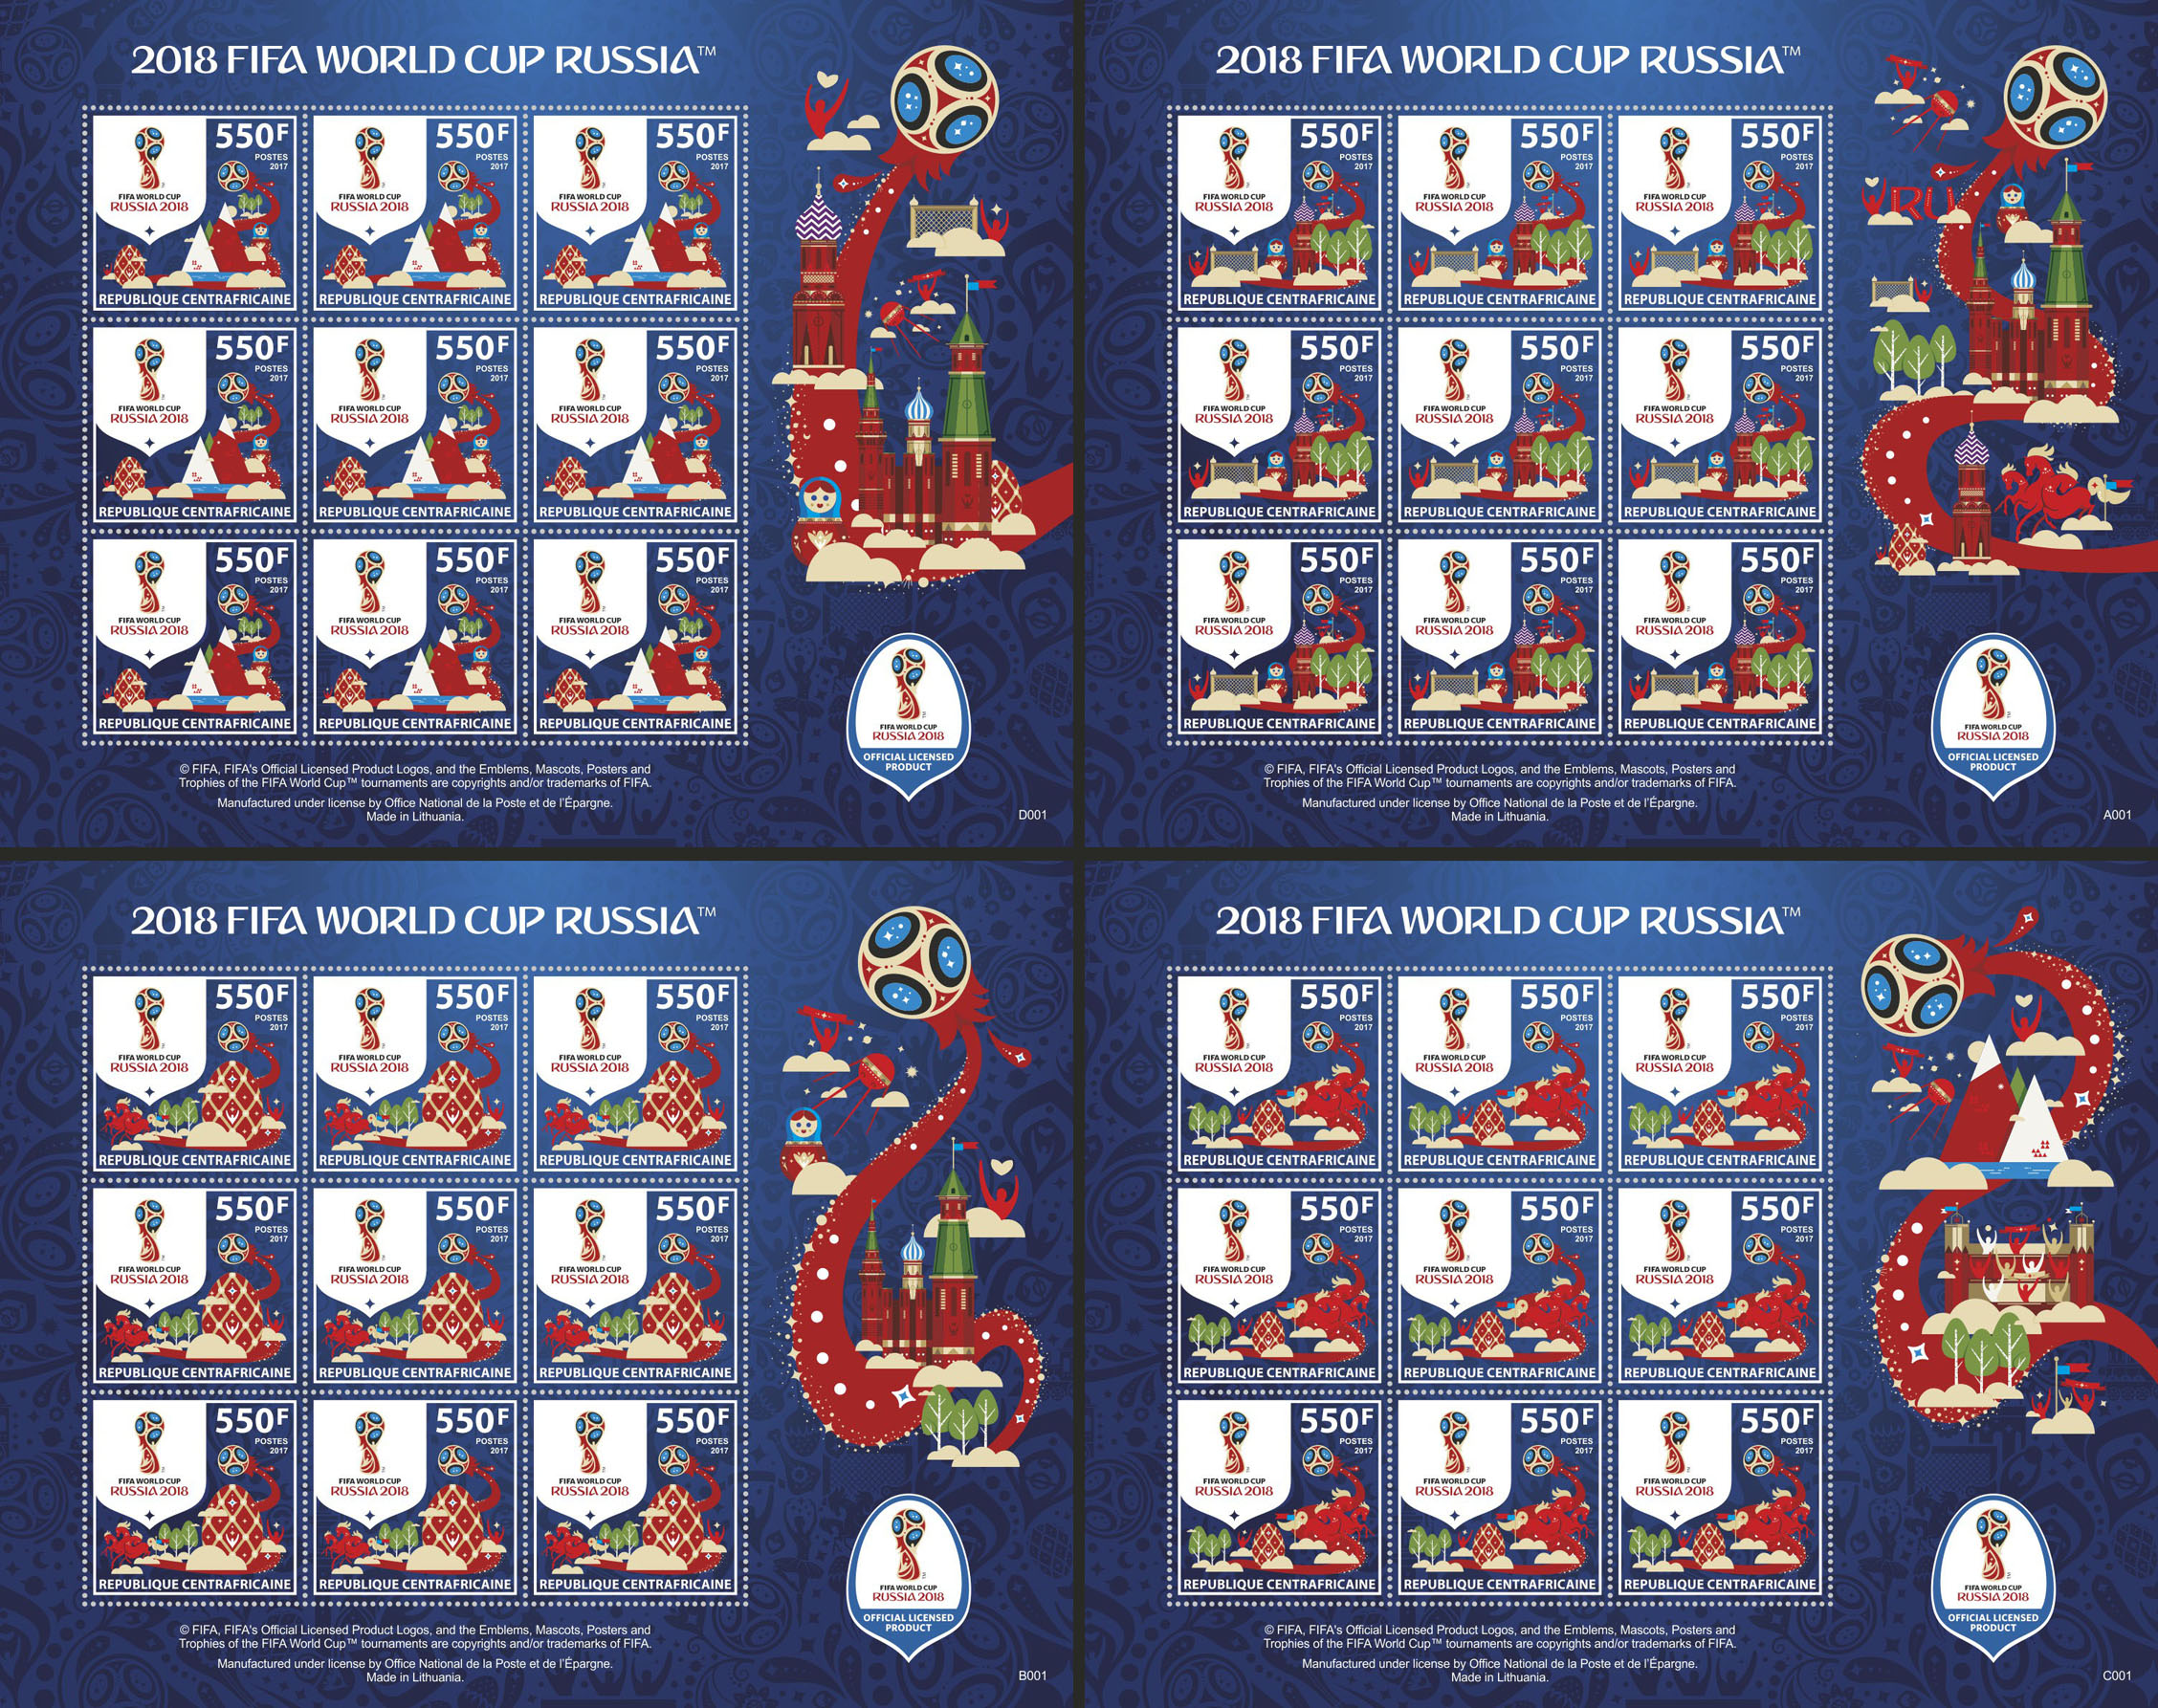 FIFA - Issue of Central African republic postage stamps